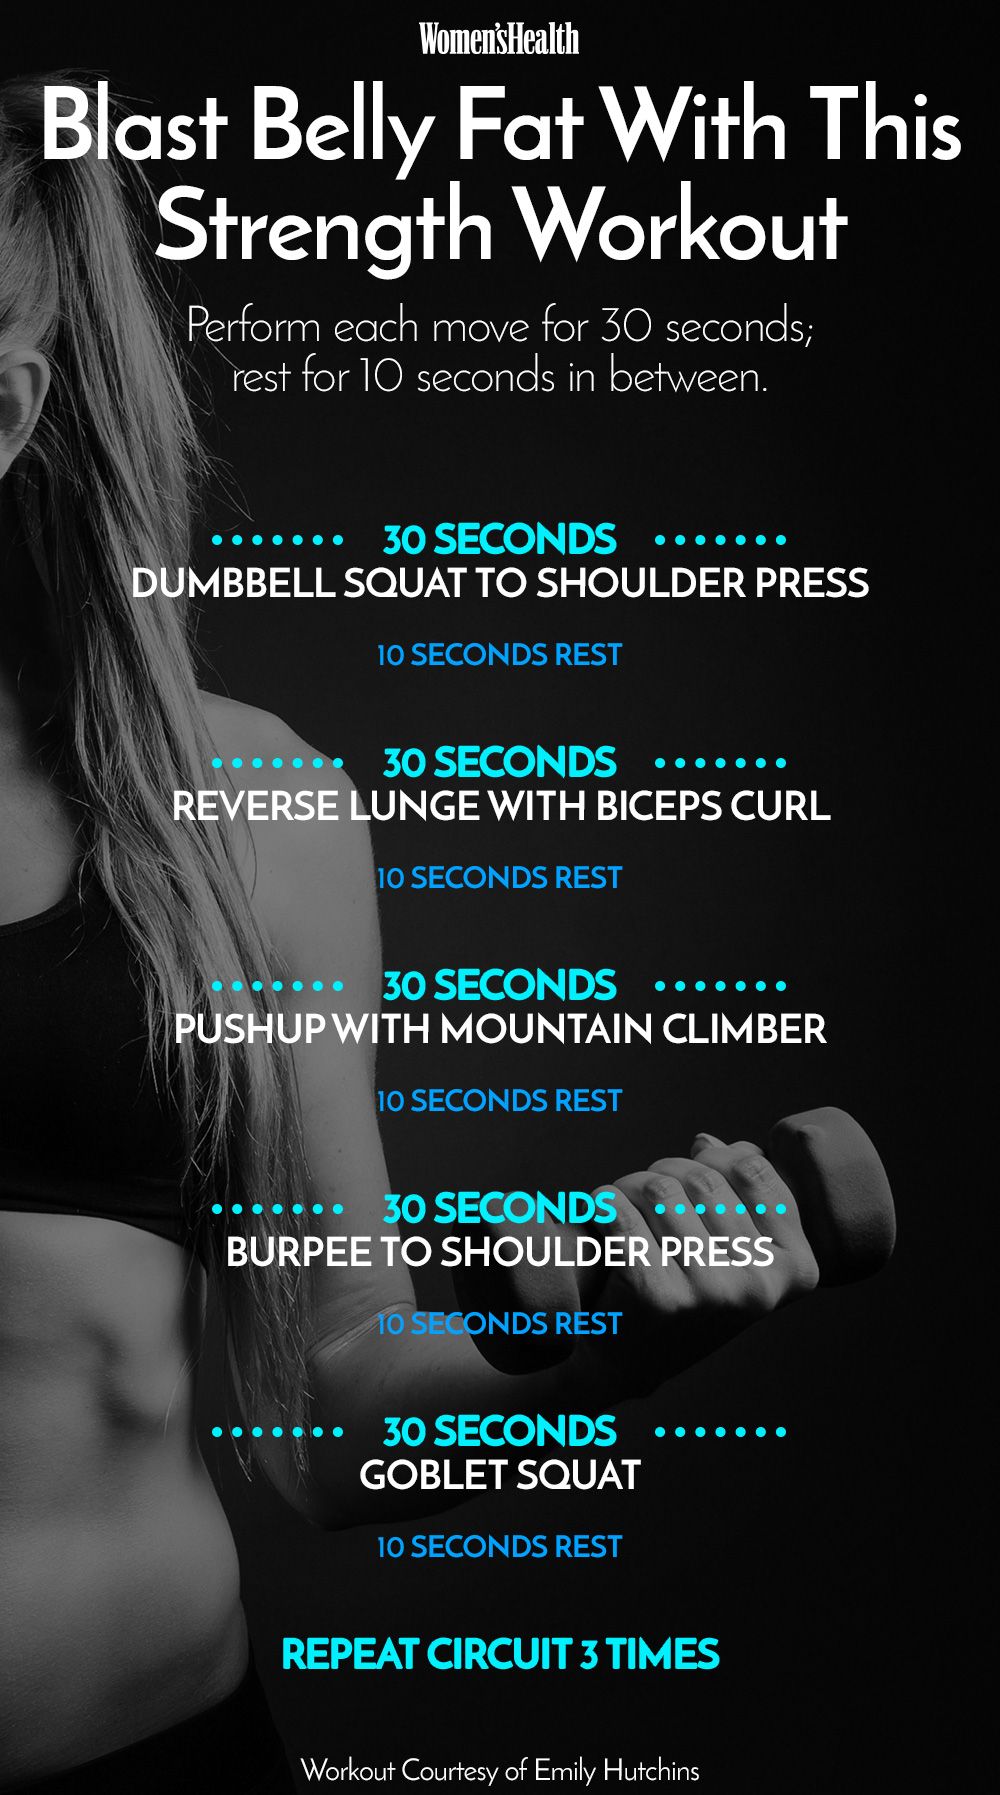 Belly fat reduction workout